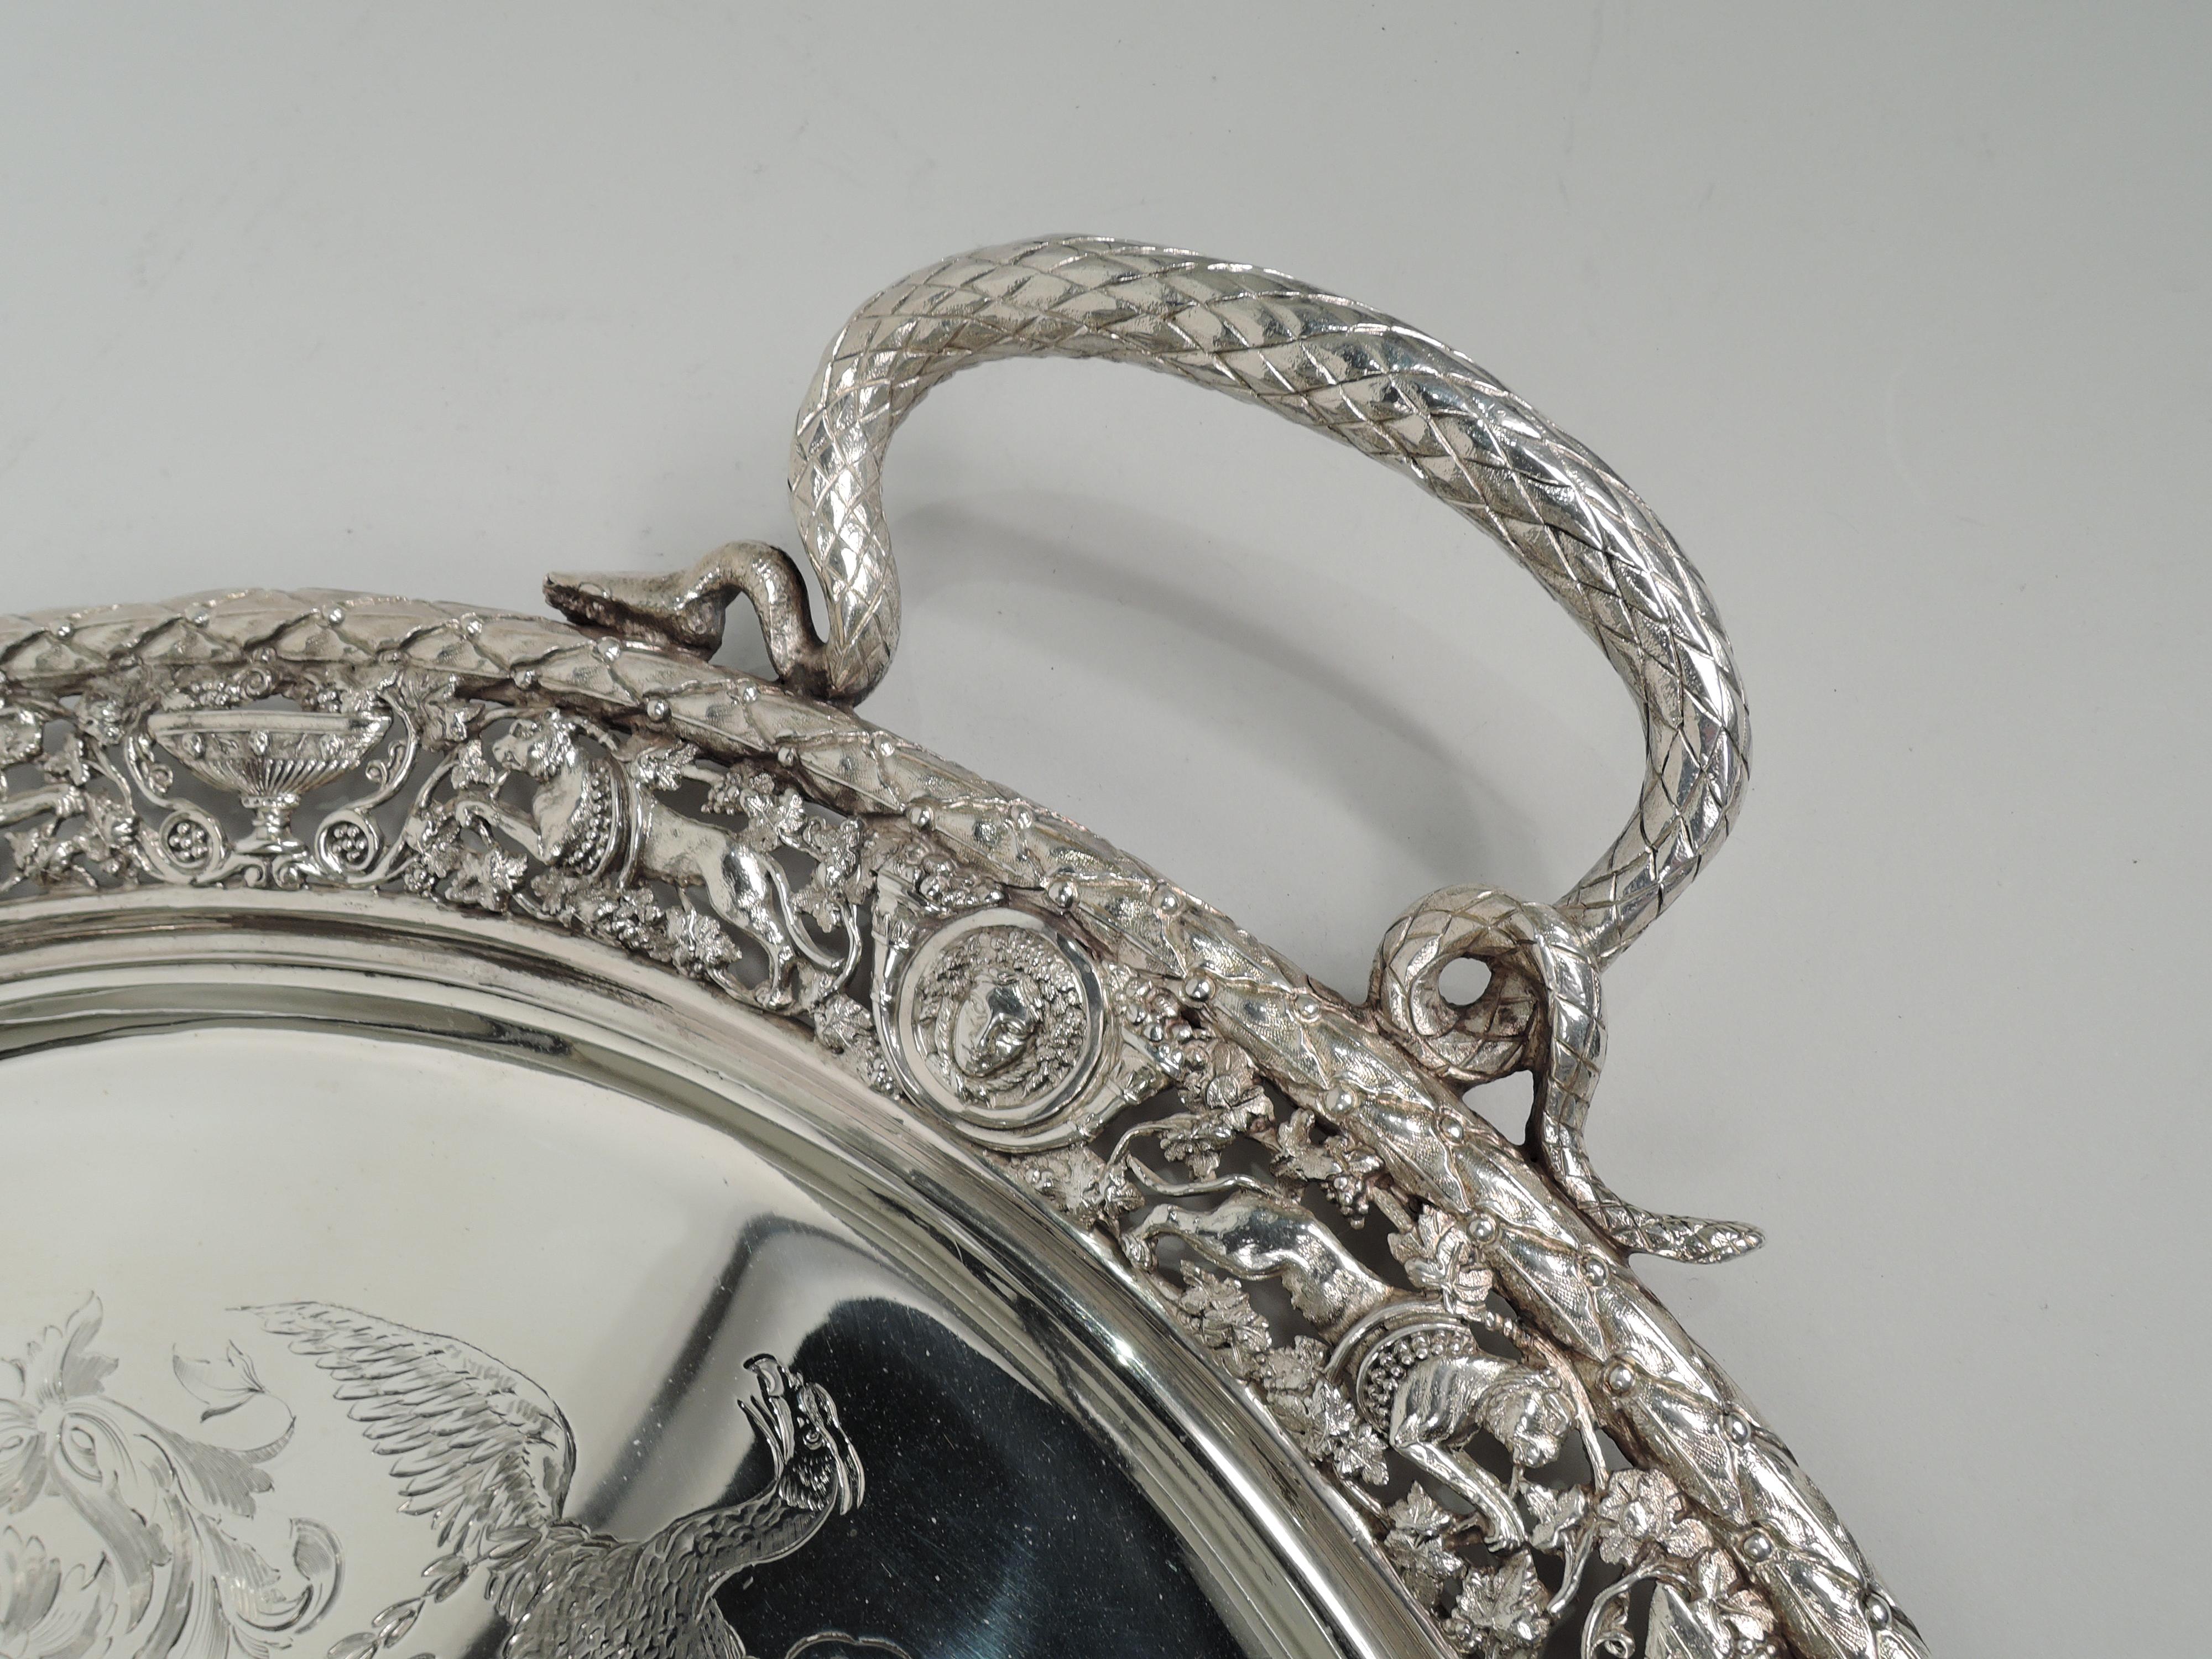 Victorian Classical sterling silver tea tray. Made by Stephen Smith in London in 1876. Oval well engraved with wreath comprising 4 eagles bestriding leafing scrollwork; center vacant. Cast open shoulder with leaping leopards, heads set in